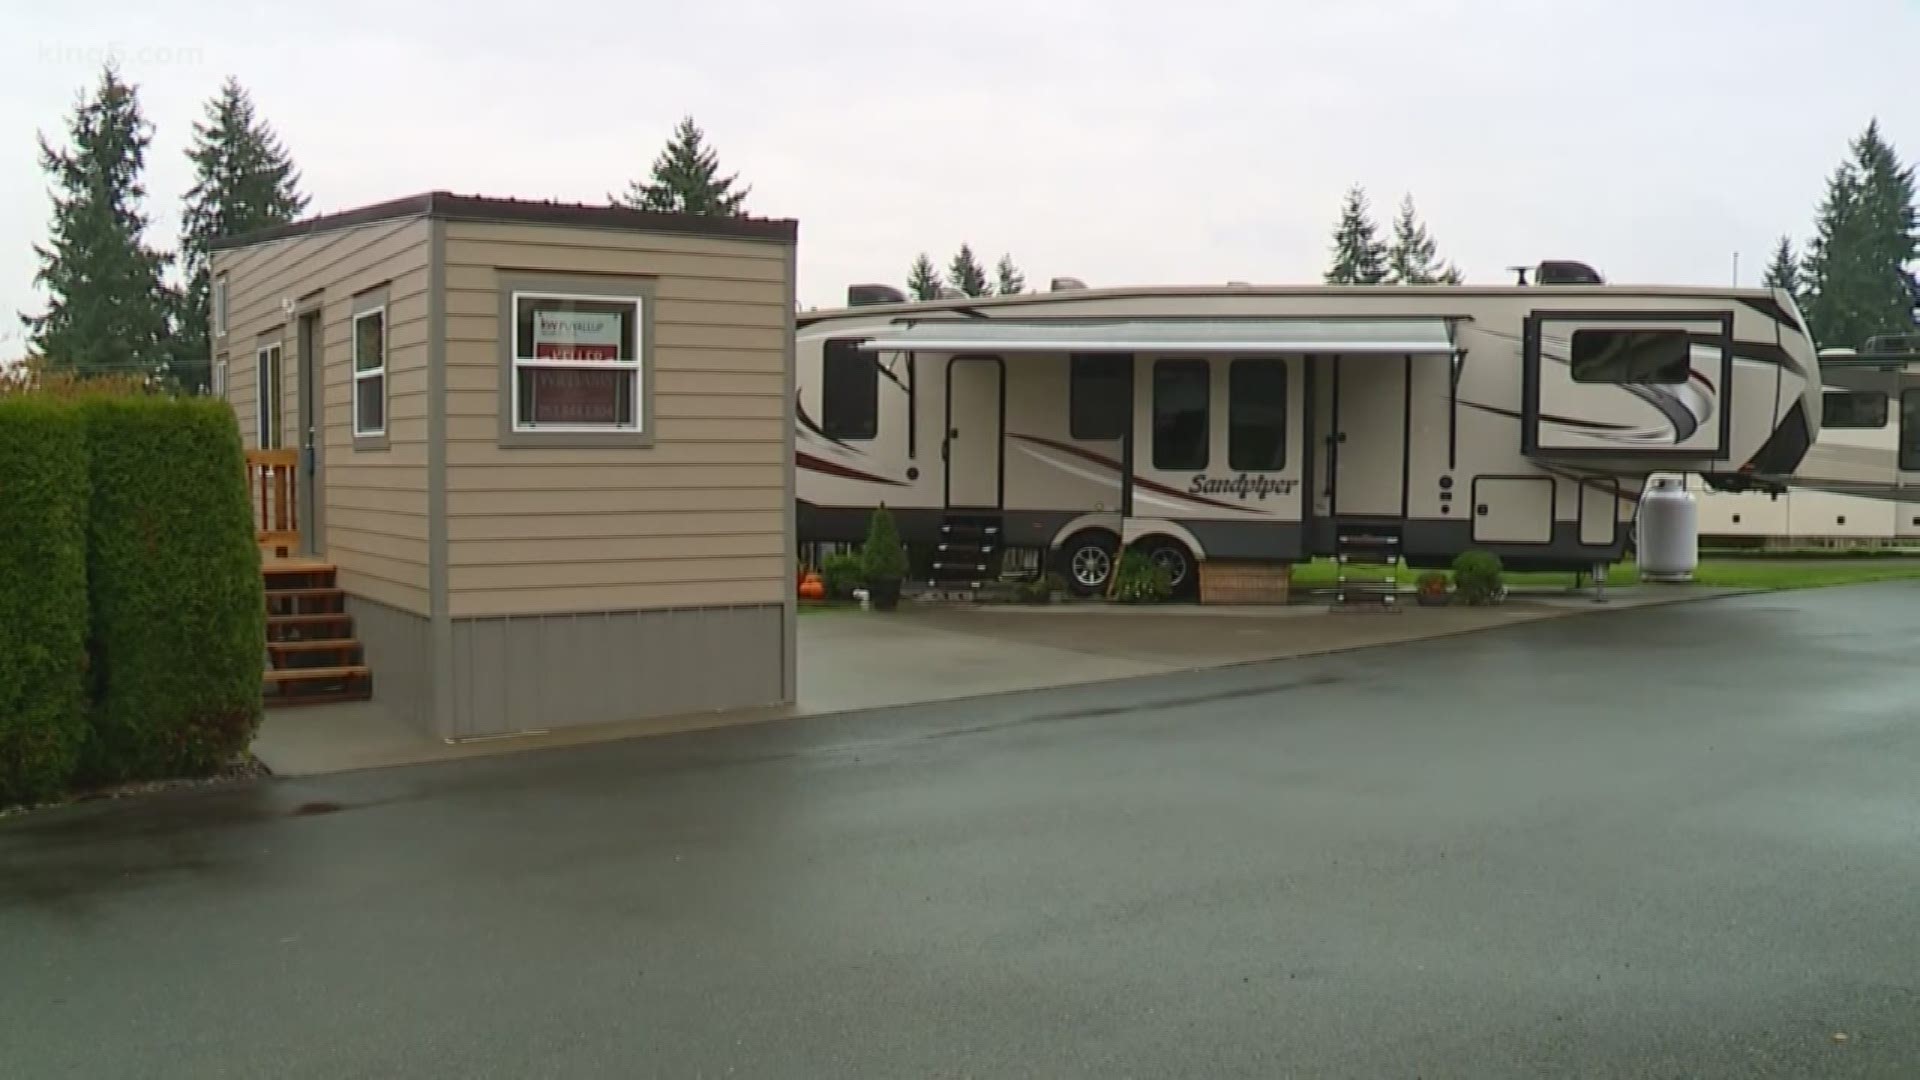 The News Tribune reports the developer intends to build 30 tiny homes to combat rising home prices in the area.